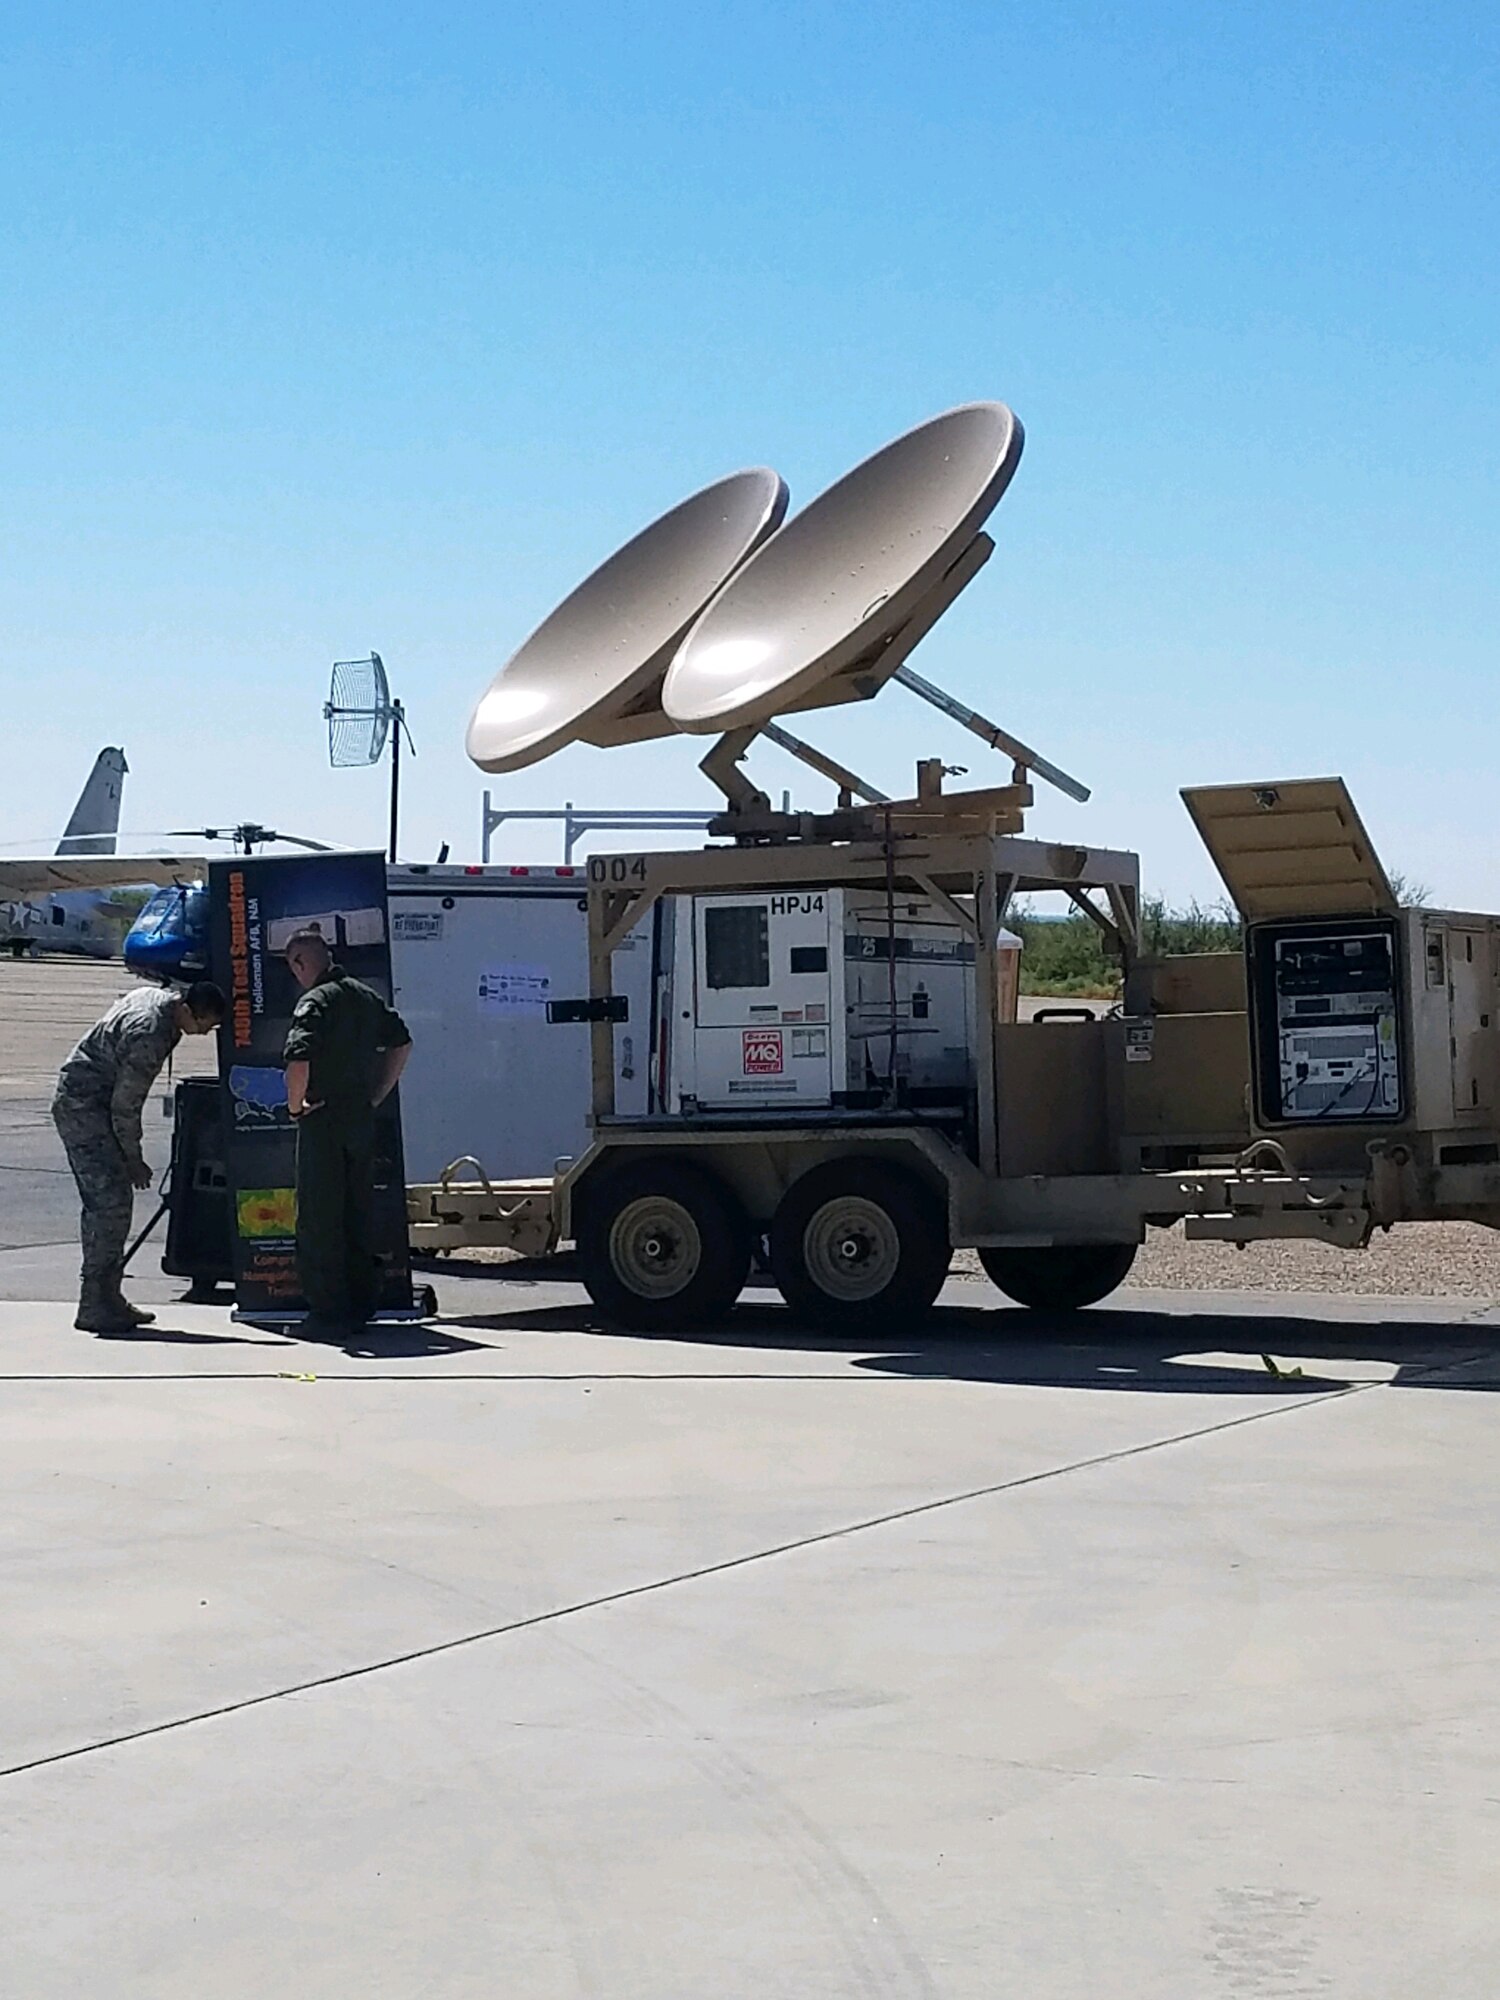 The 746th Test Squadron's High Powered Jammer, which is used for navigational warfare, was on display at the New Mexico Aviation Aerospace Association Career Expo held recently at Alamogordo-White Sands Regional Airport. (U.S. Air Force photo)